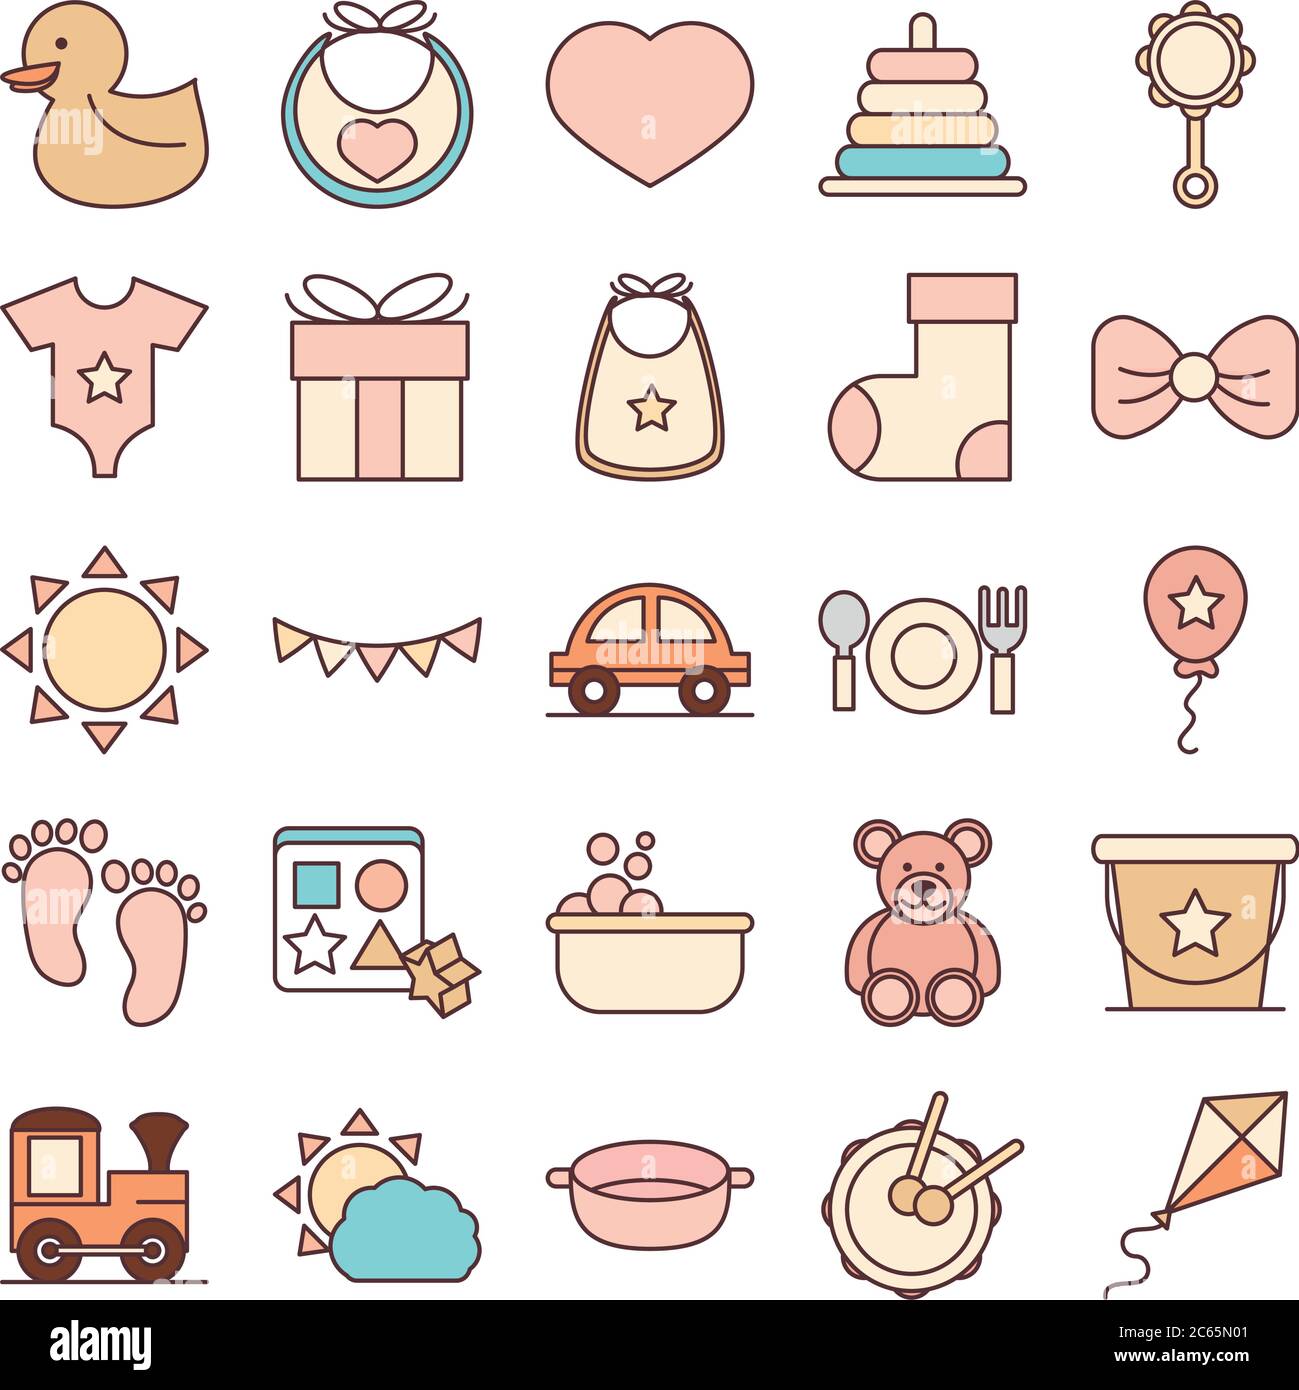 https://c8.alamy.com/comp/2C65N01/baby-feeding-toys-and-clothes-welcome-newborn-icons-set-line-and-fill-design-vector-illustration-2C65N01.jpg